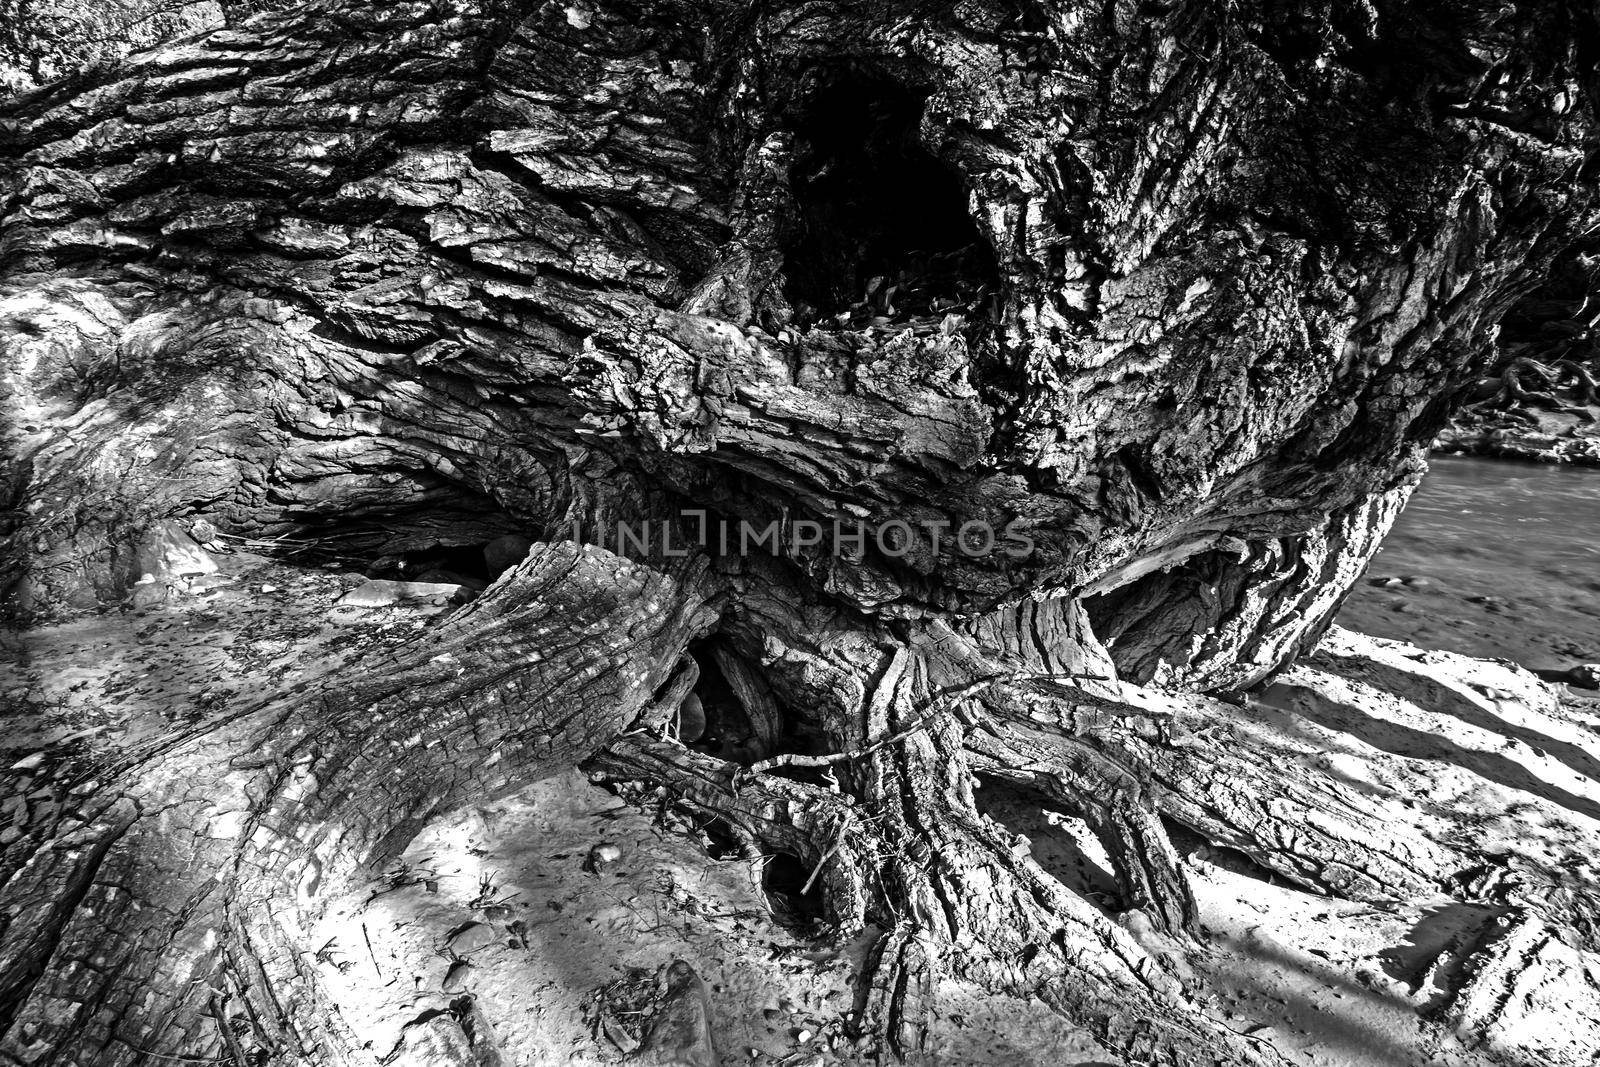 Abstract monochrome image of an old Cottonwood tree desroyed by a recent flood, on the bank of the Virgin River. Pa;rus Trail, Zion National Park. Utah